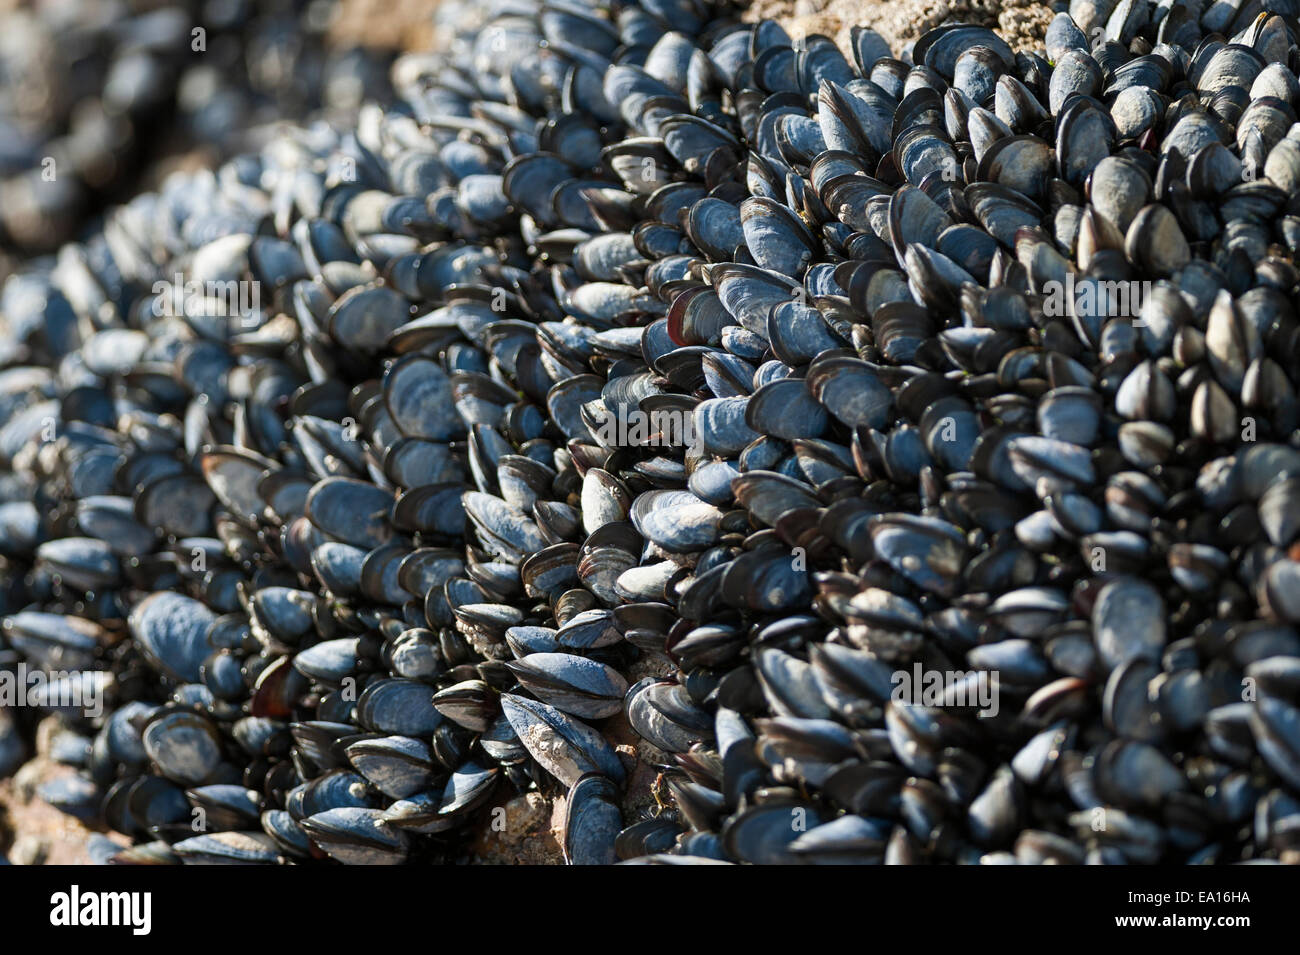 Blue mussels on rocks at Gorran Haven, Cornwall. Stock Photo